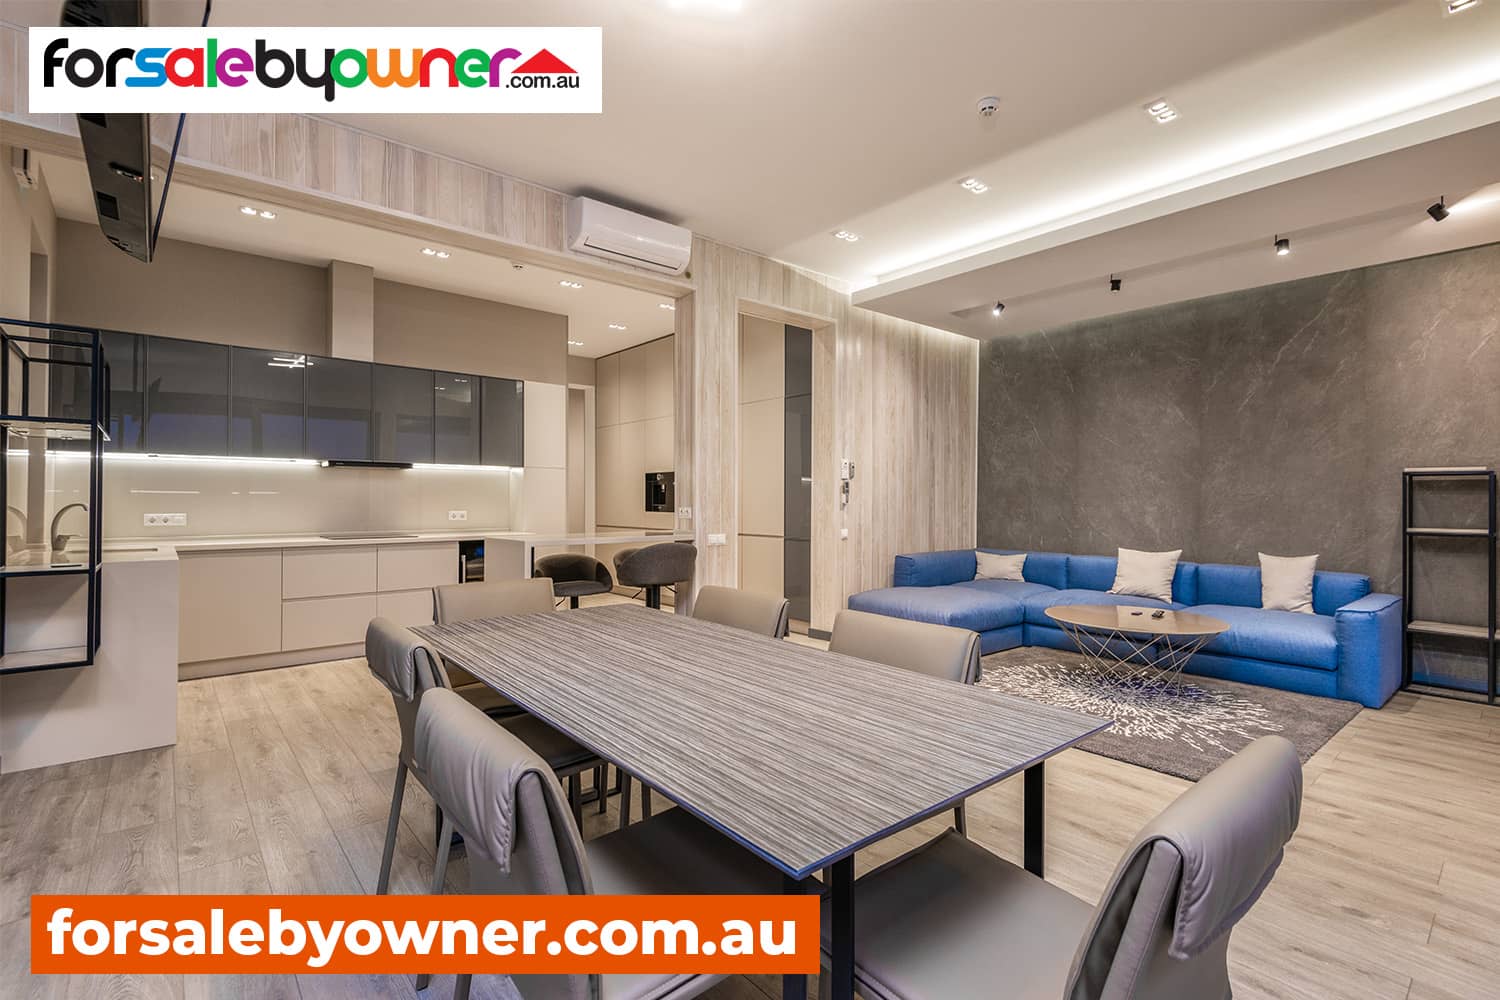 For Sale By Owner VIC | Sell My House Victoria